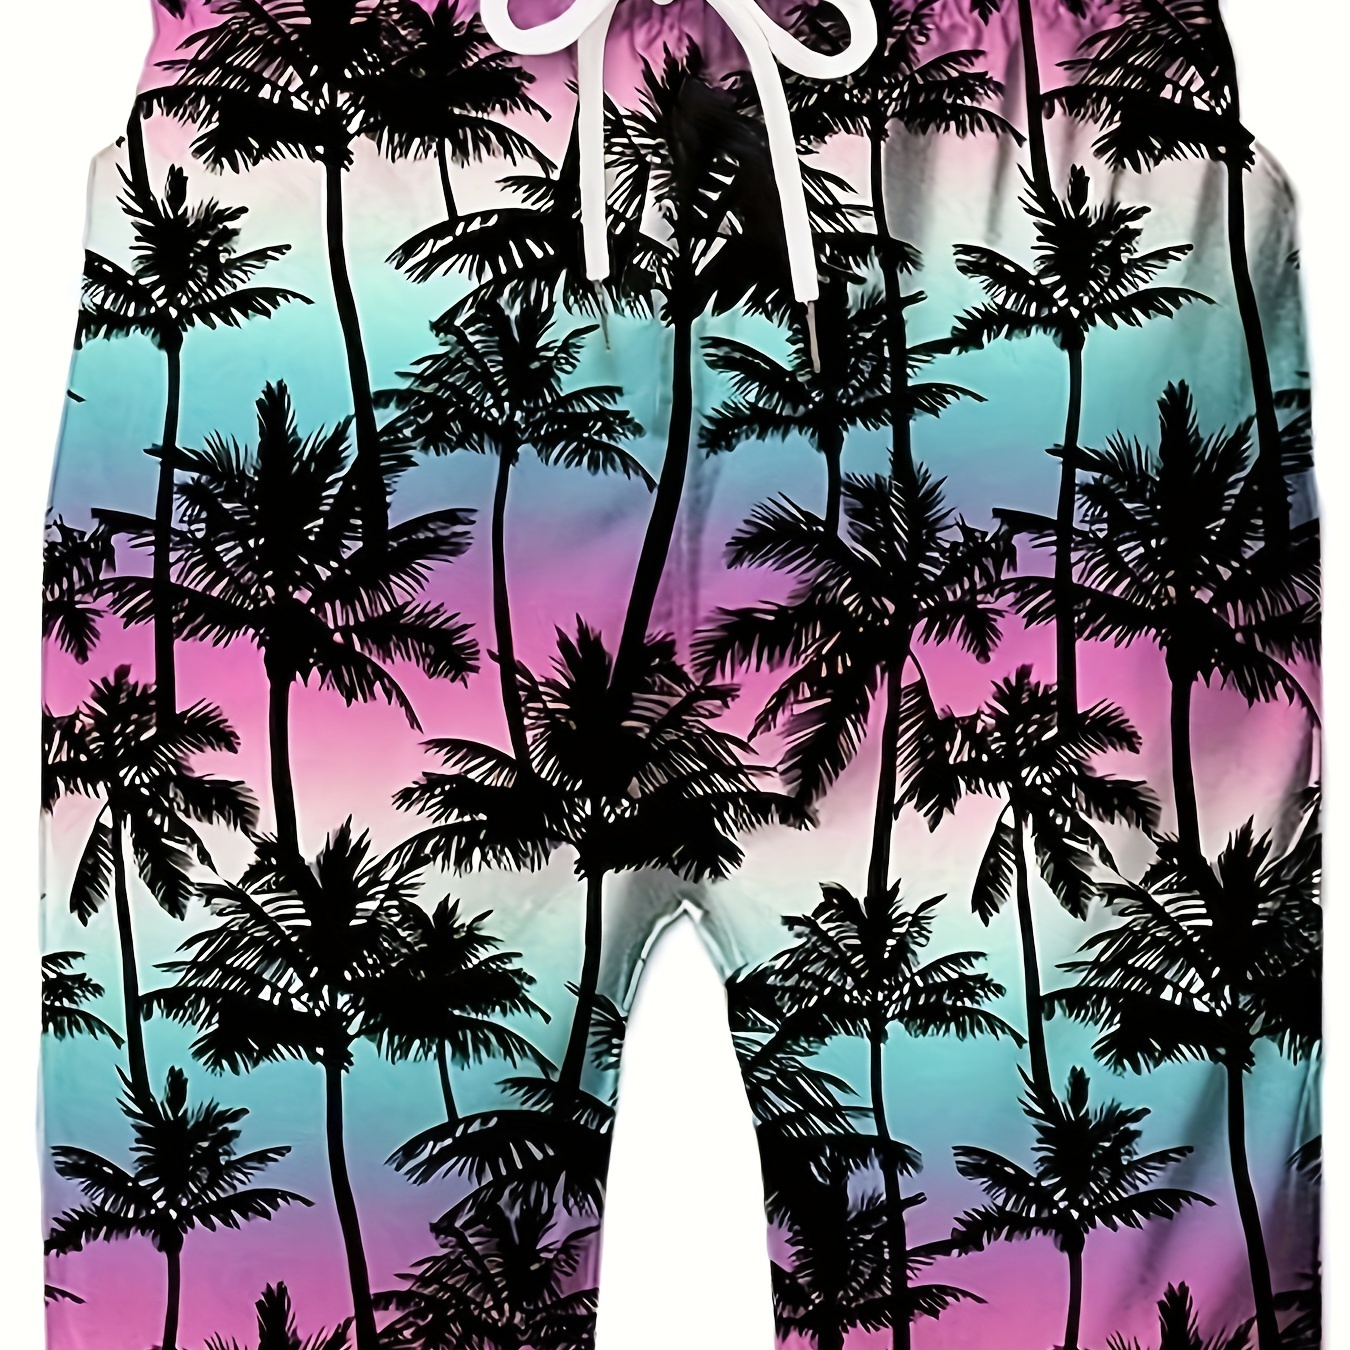 

Tropical Trees Pattern Allover Print Men's Loose Beach Shorts Activewear, Drawstring Quick Dry Shorts, Lightweight Shorts For Summer Beach Holiday Surfing